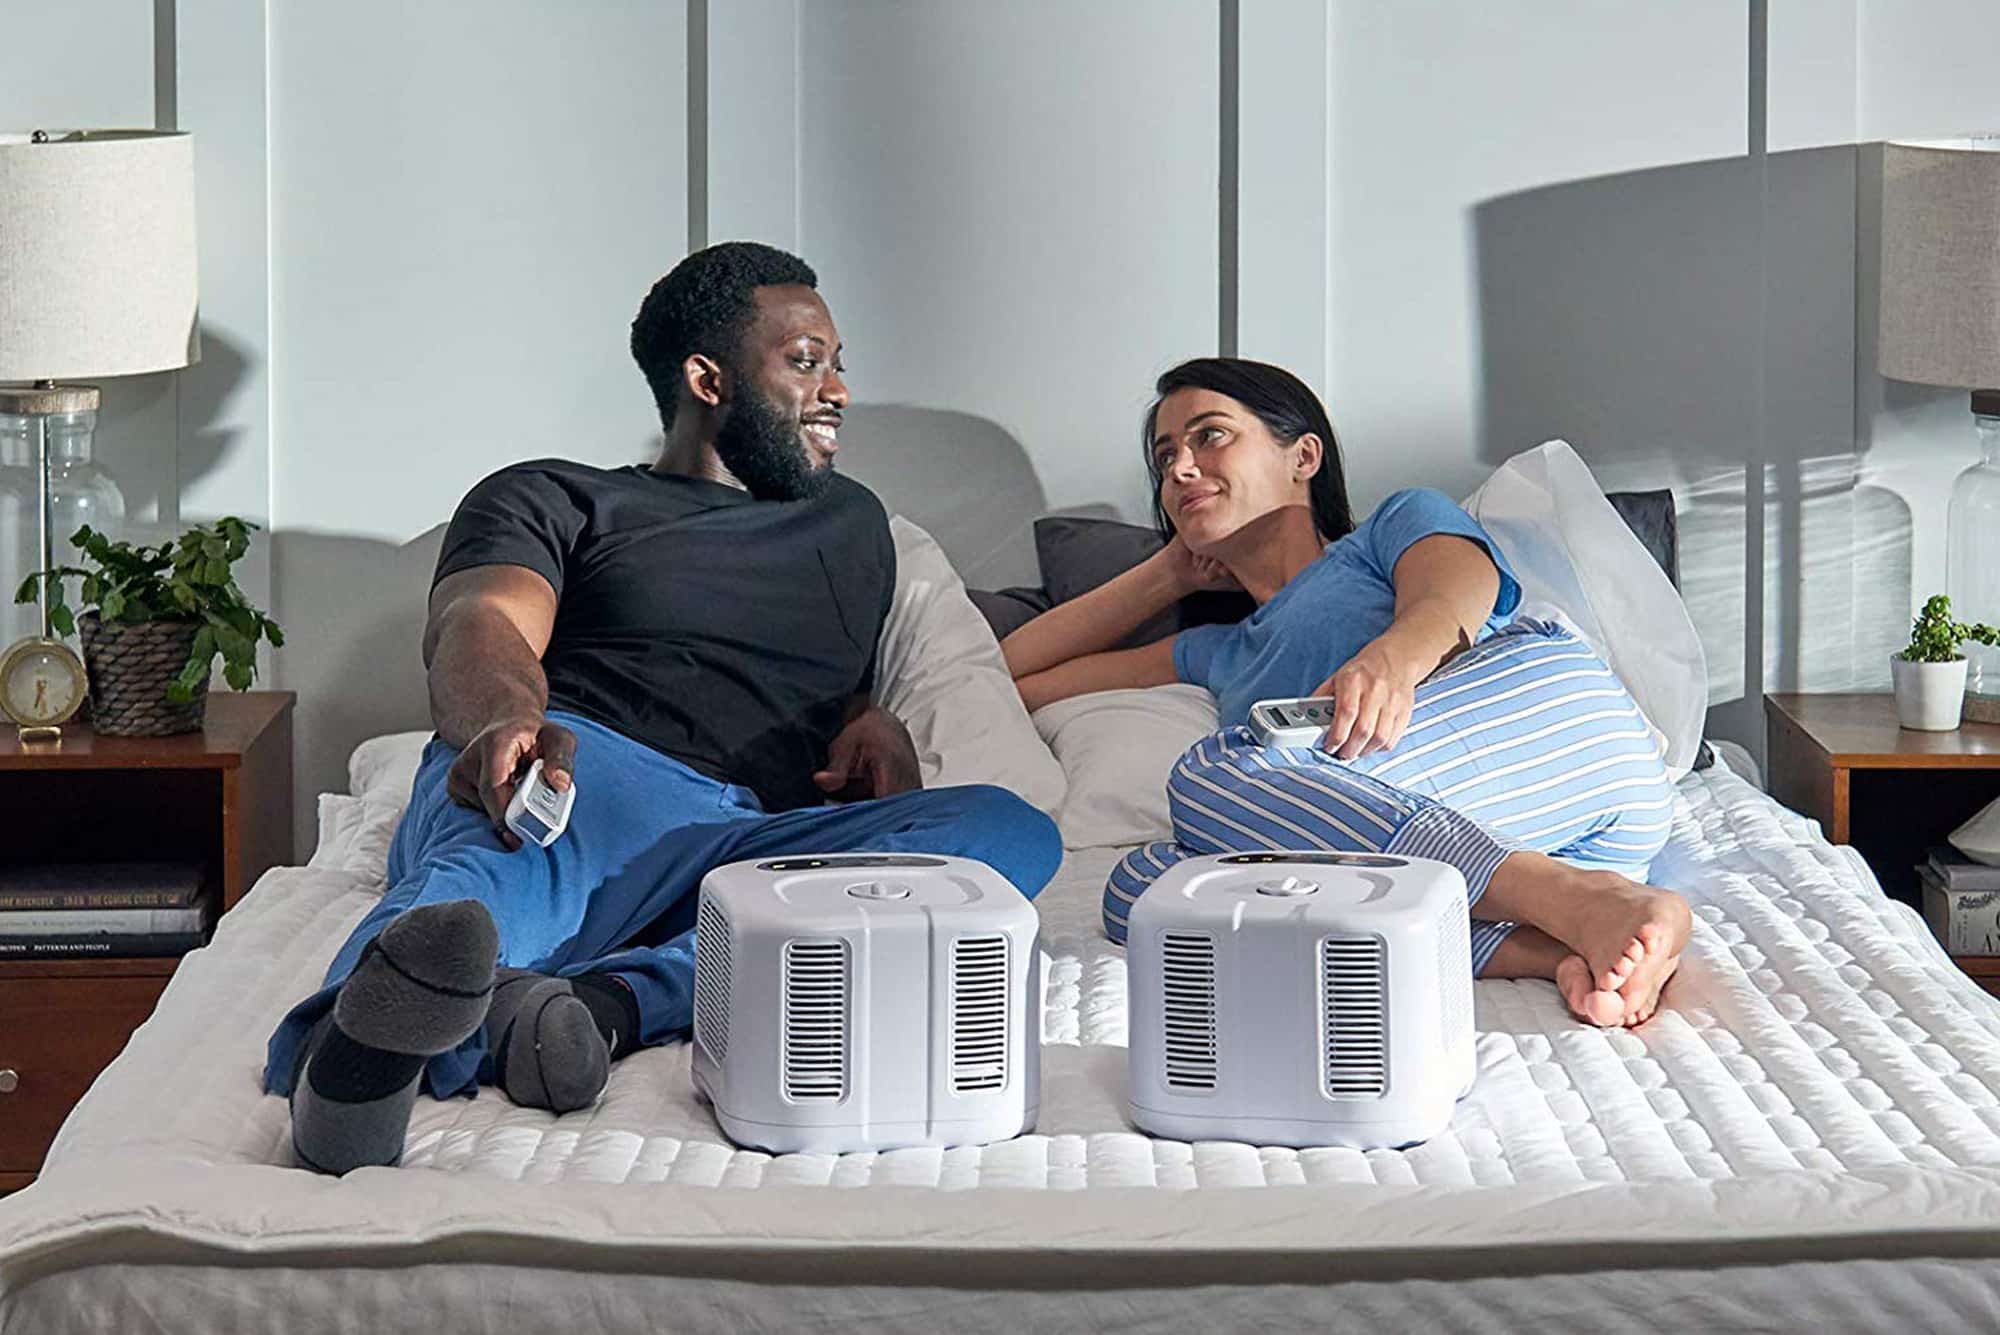 used chilipad - Chilipad Sleep System Review: Answer For Hot Night? - Terry Cralle